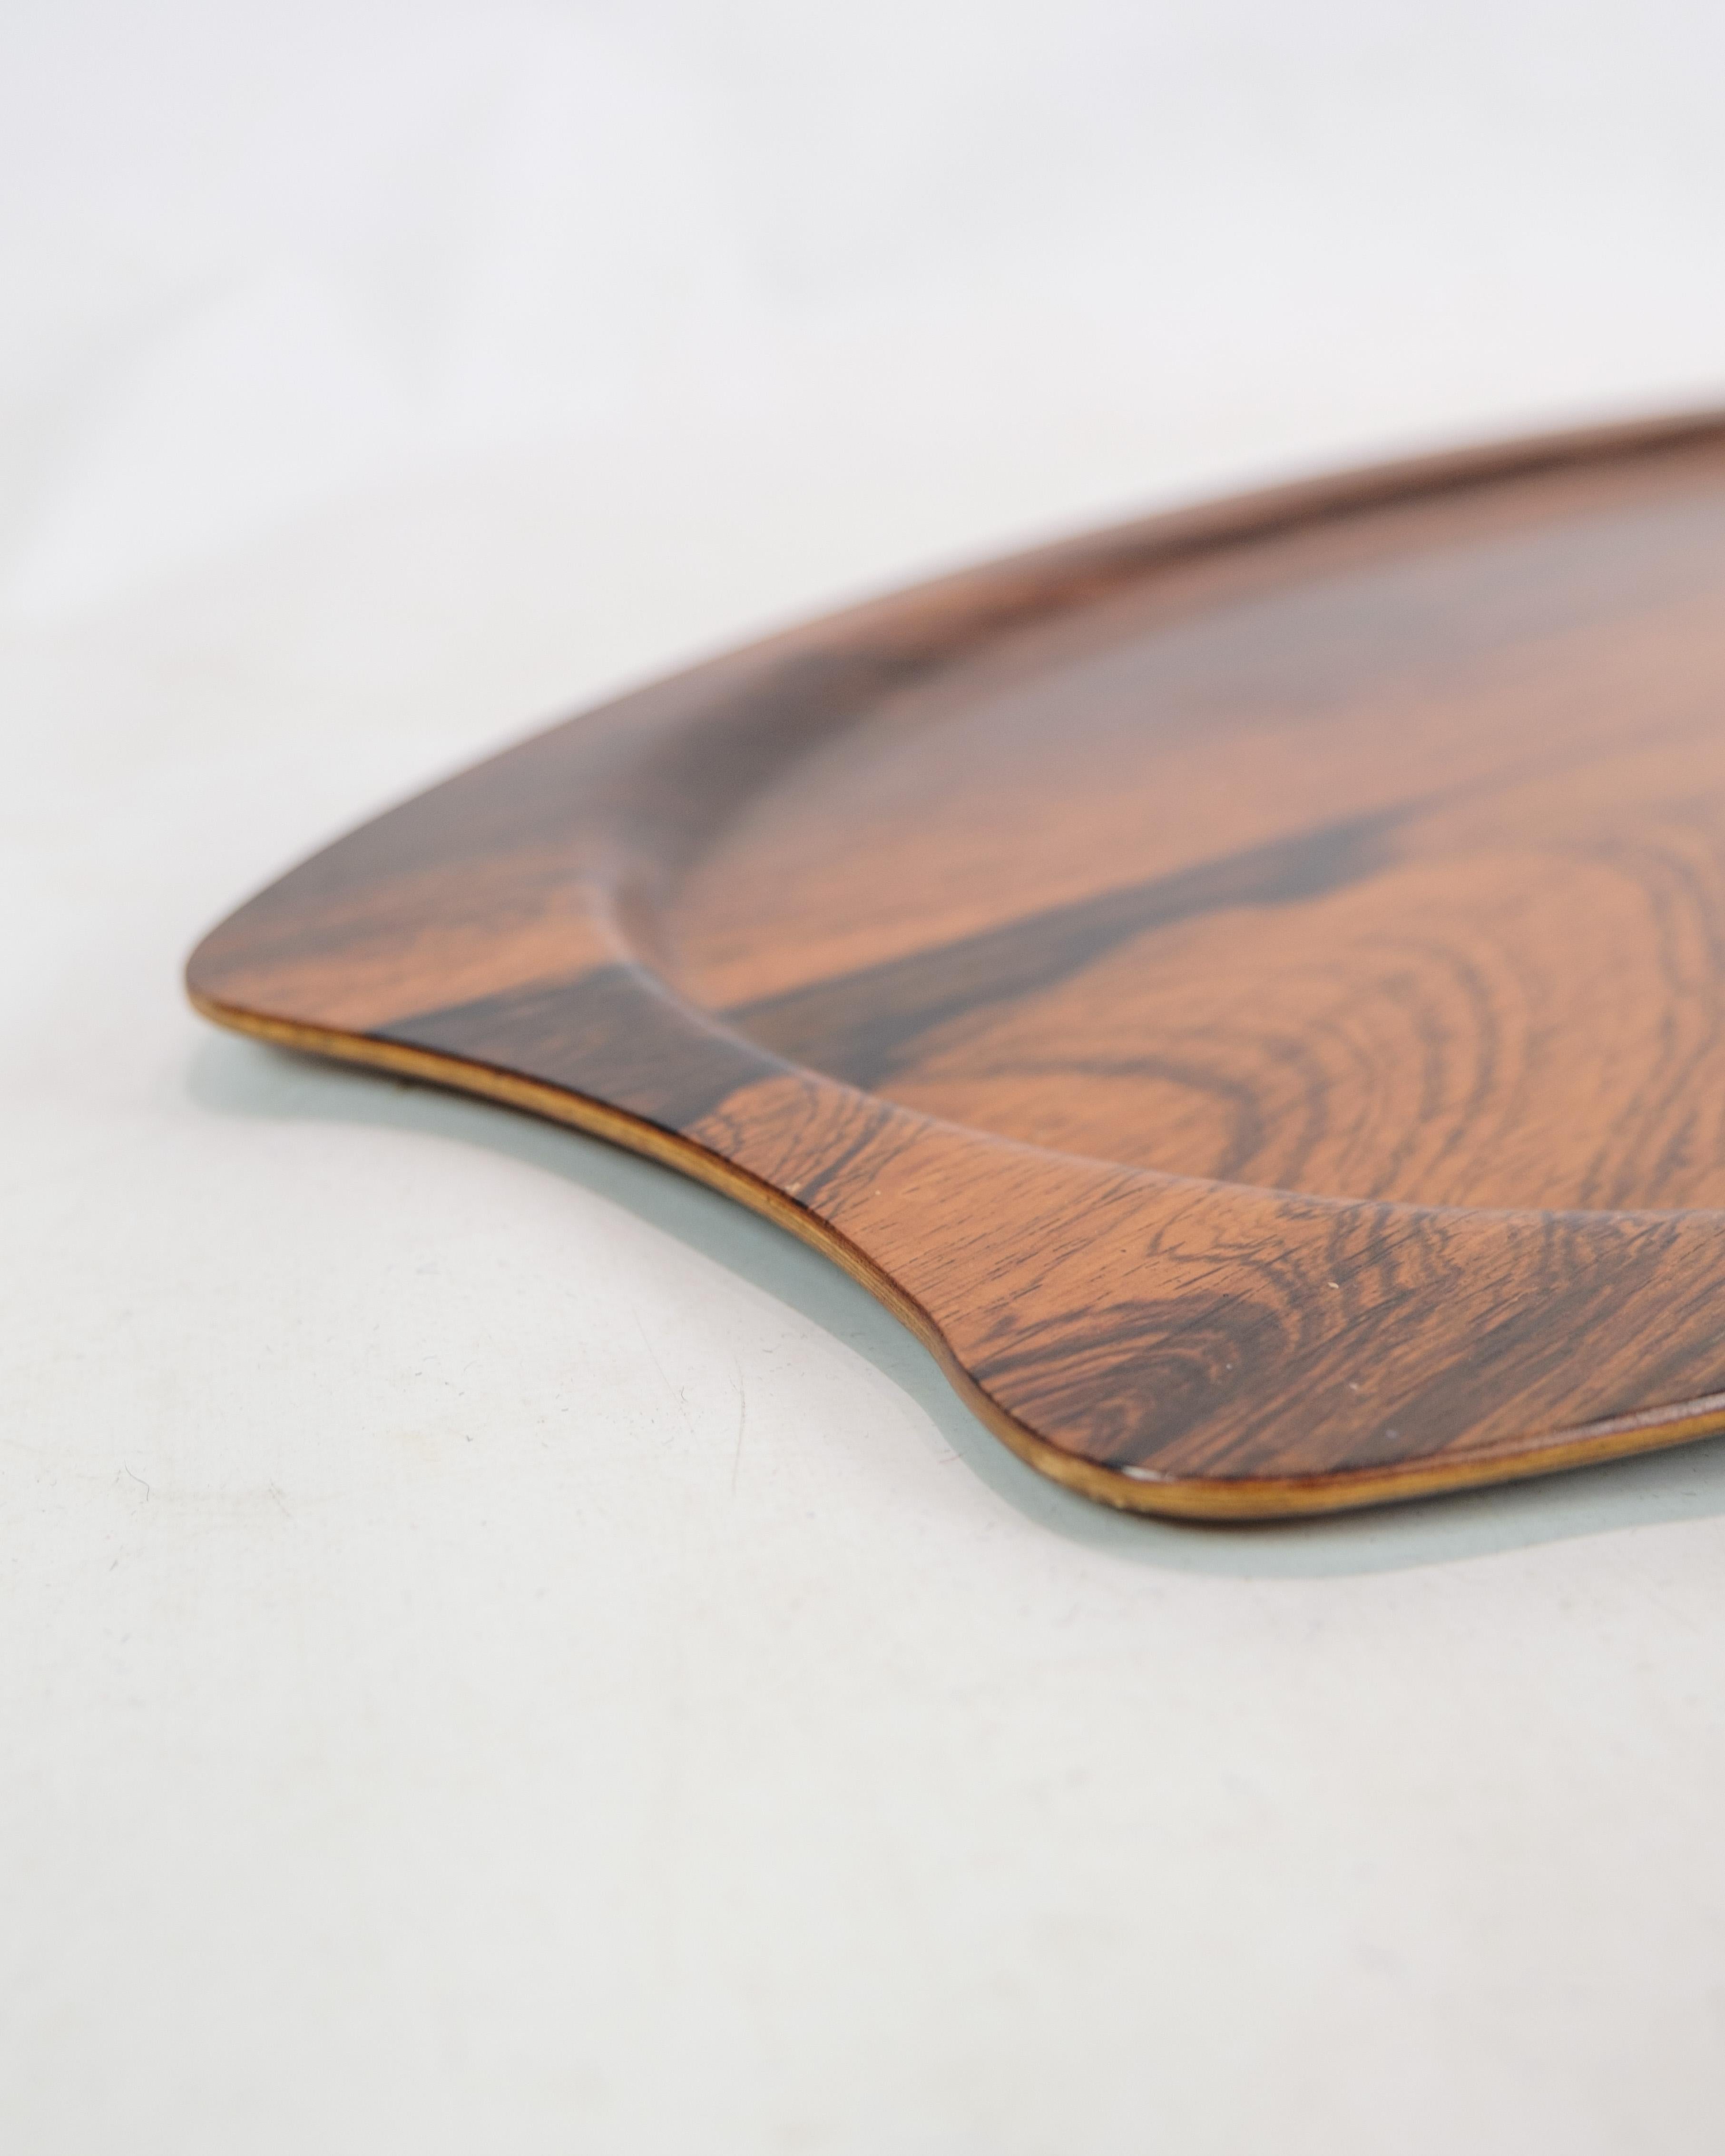 This serving tray is a beautiful example of Danish design from the 1960s, made of rosewood and produced by Silva. Bakken exudes a timeless elegance and craftsmanship characteristic of this era of furniture design.

The warm tone and beautiful grain